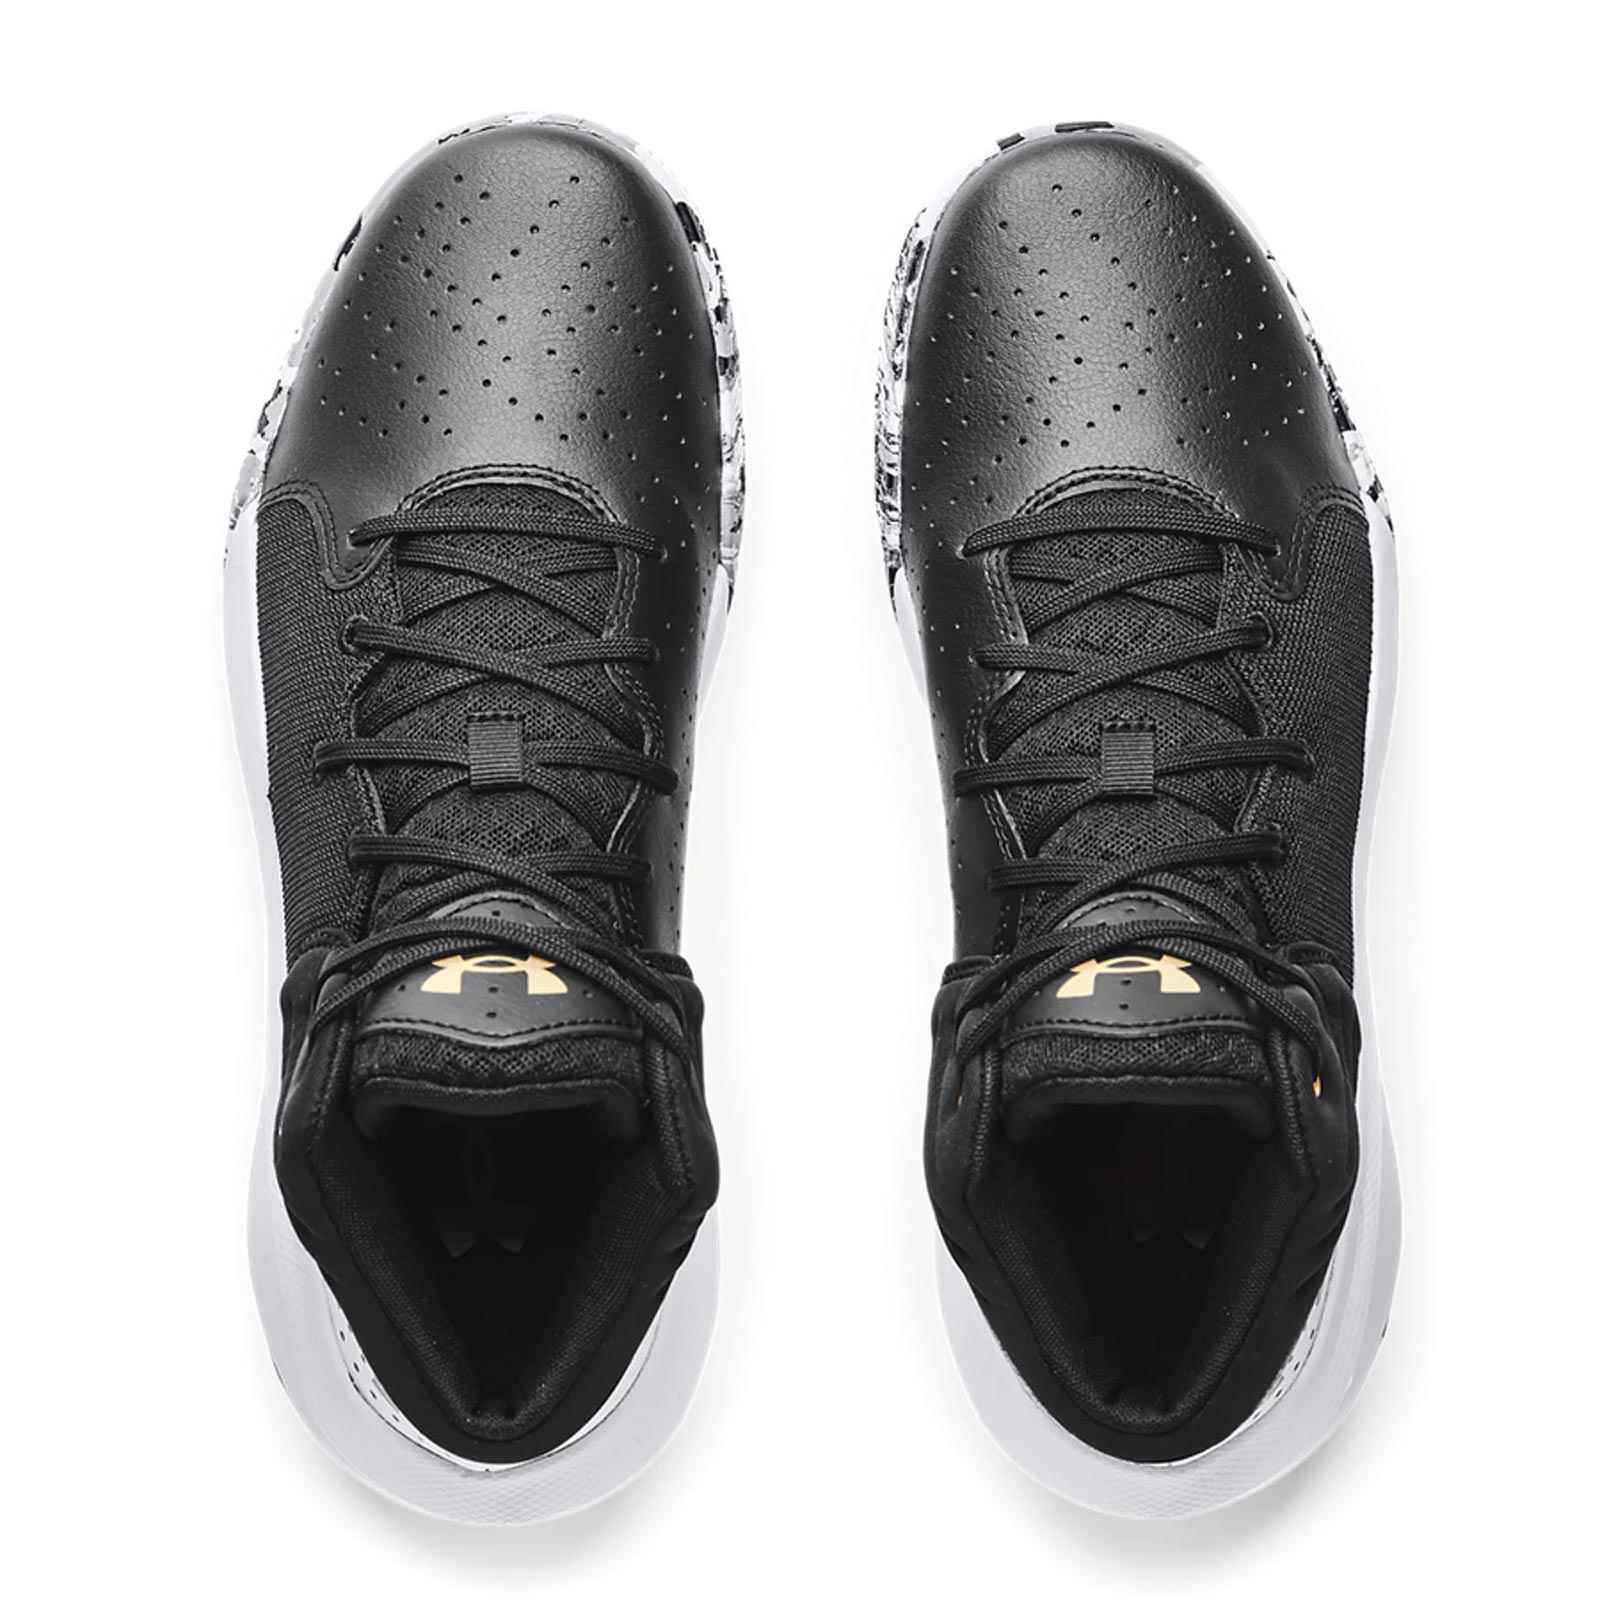 UNDER ARMOUR JET '21 UNISEX BASKETBALL SHOES